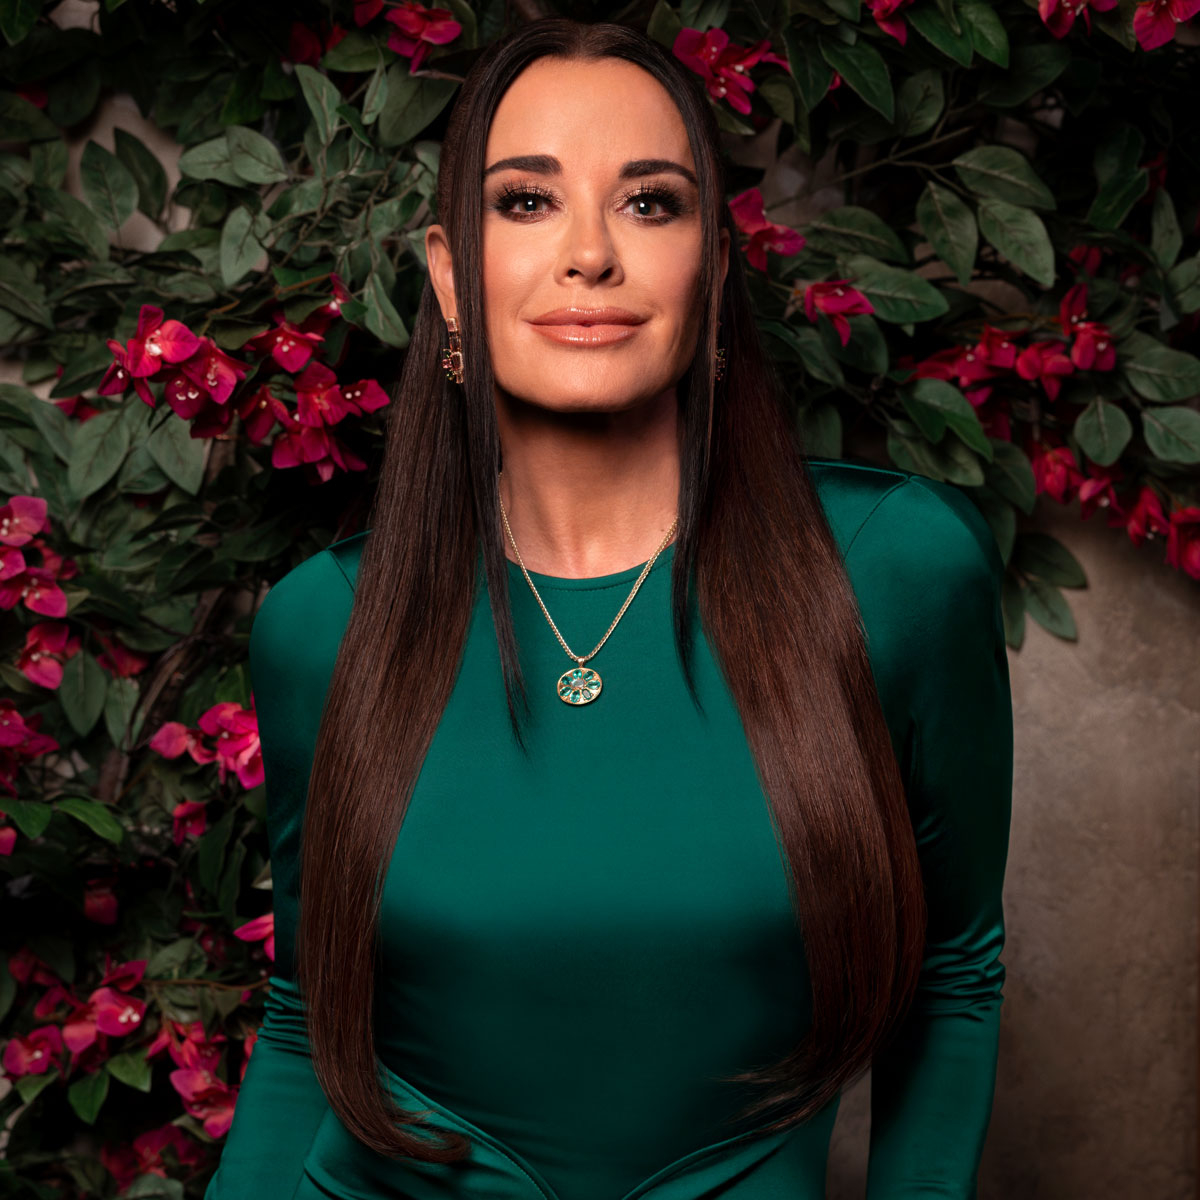 RHOBH's Kyle Richards' Guide To Cozy Luxury Without Spending a Fortune